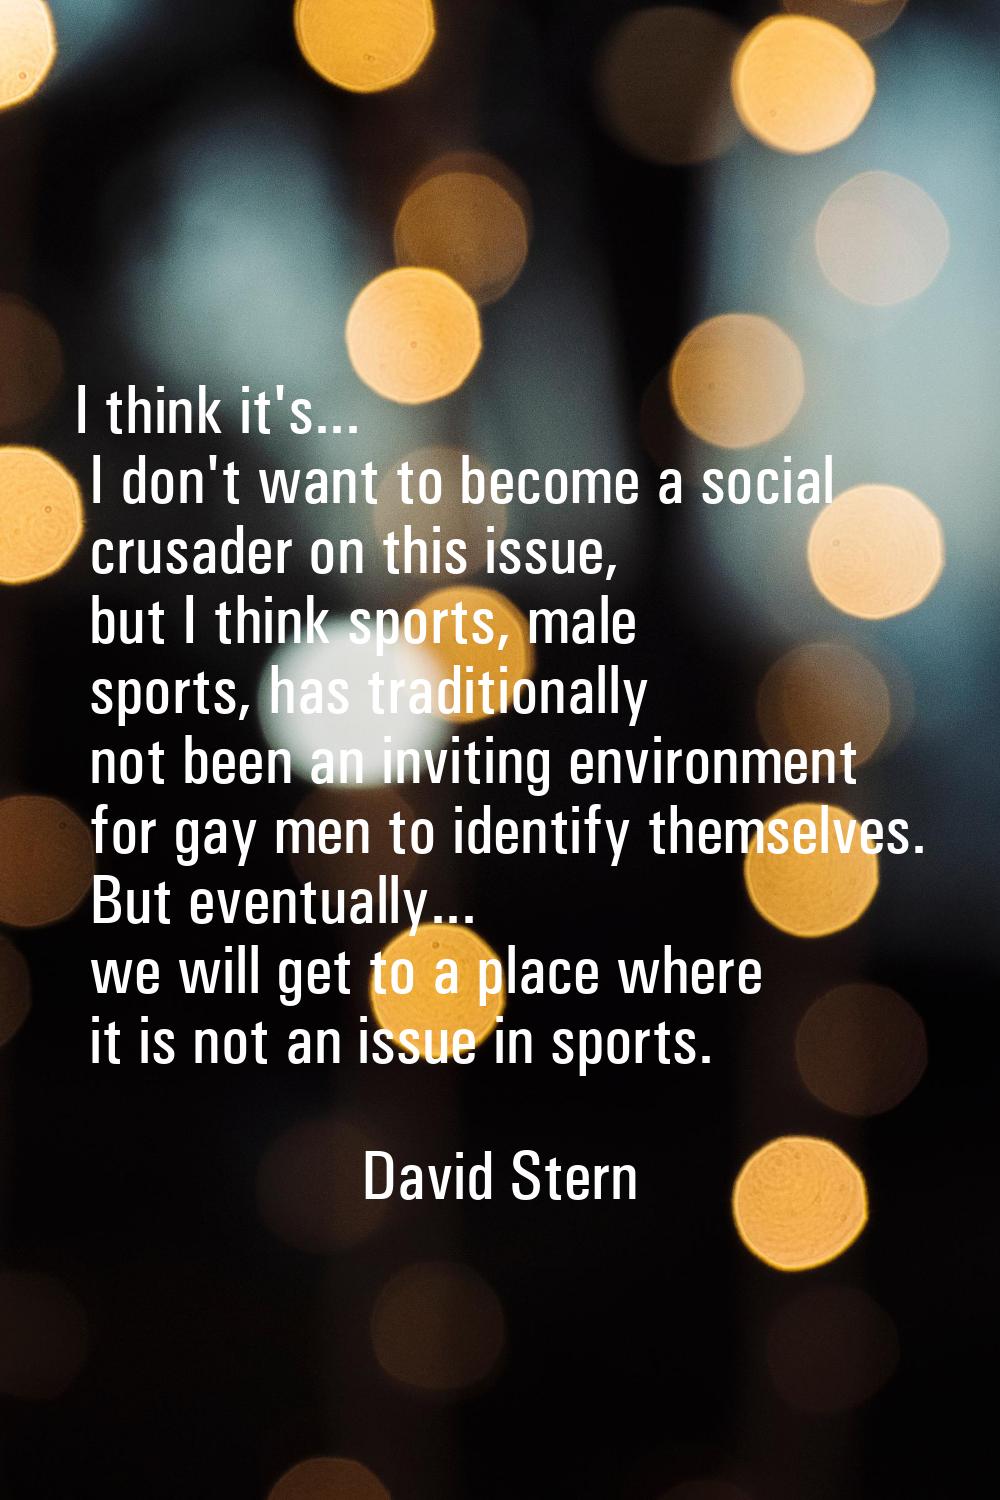 I think it's... I don't want to become a social crusader on this issue, but I think sports, male sp